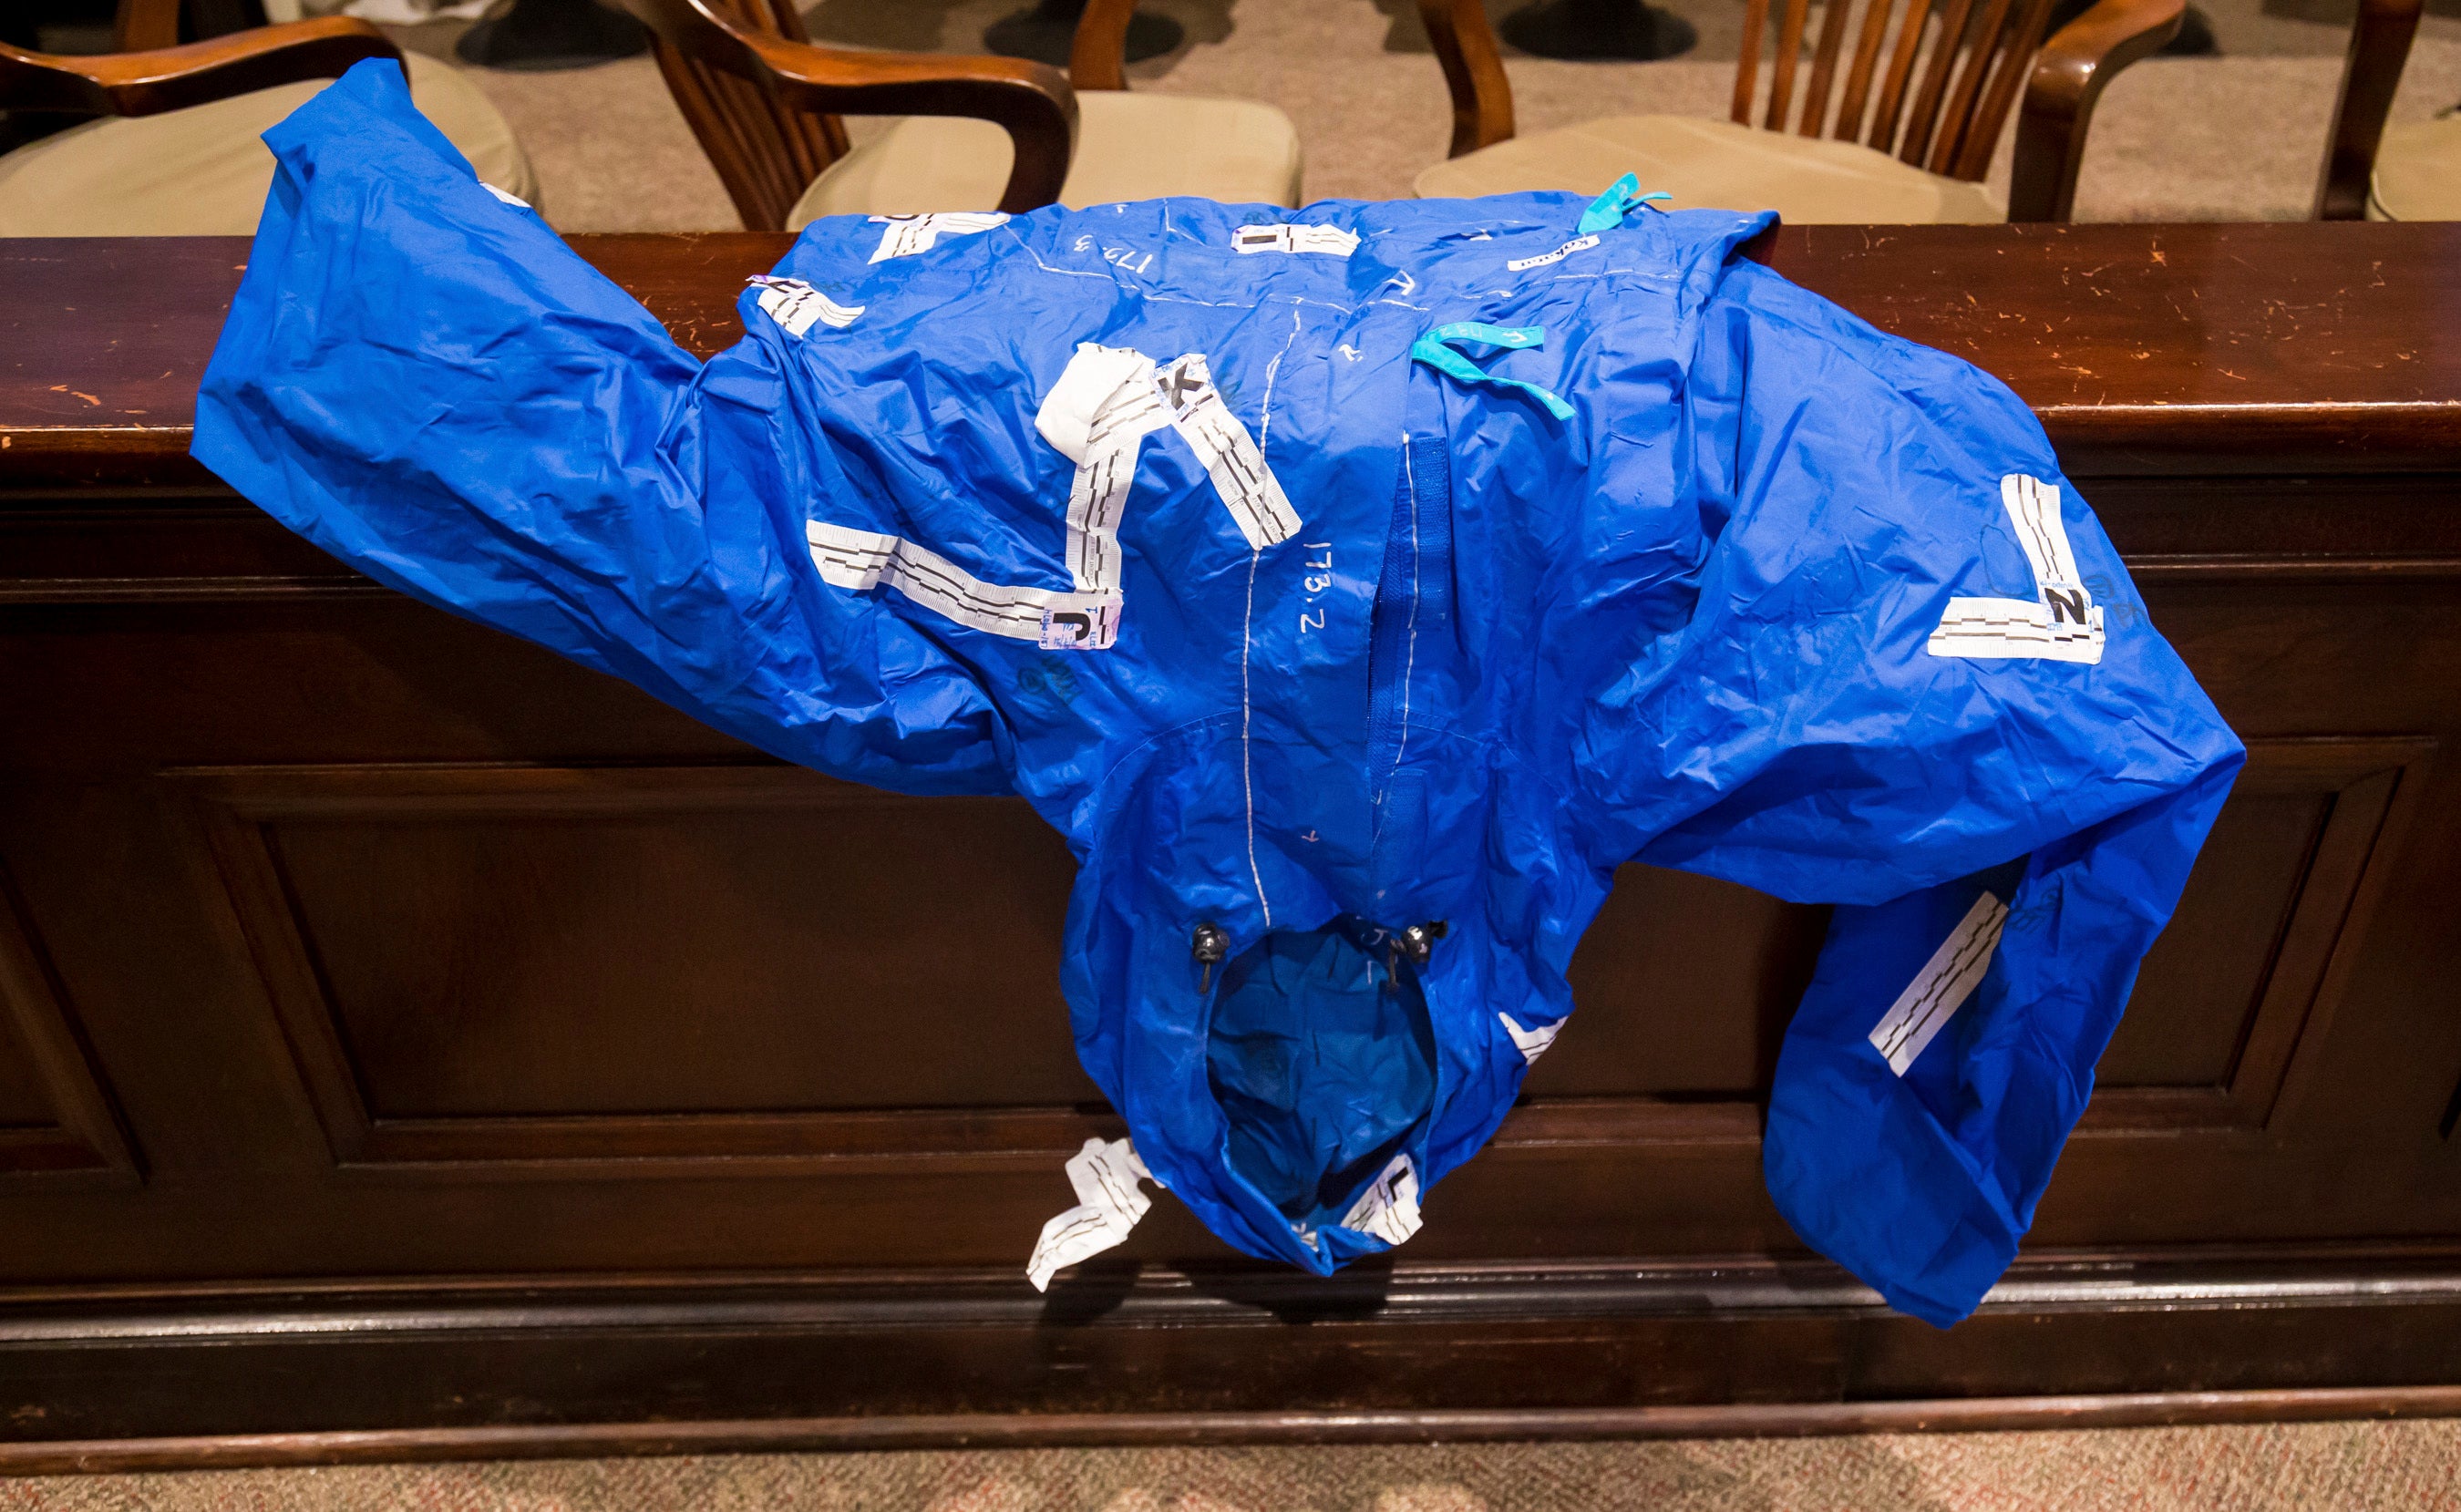 The blue rainjacket which was covered in gunshot residue